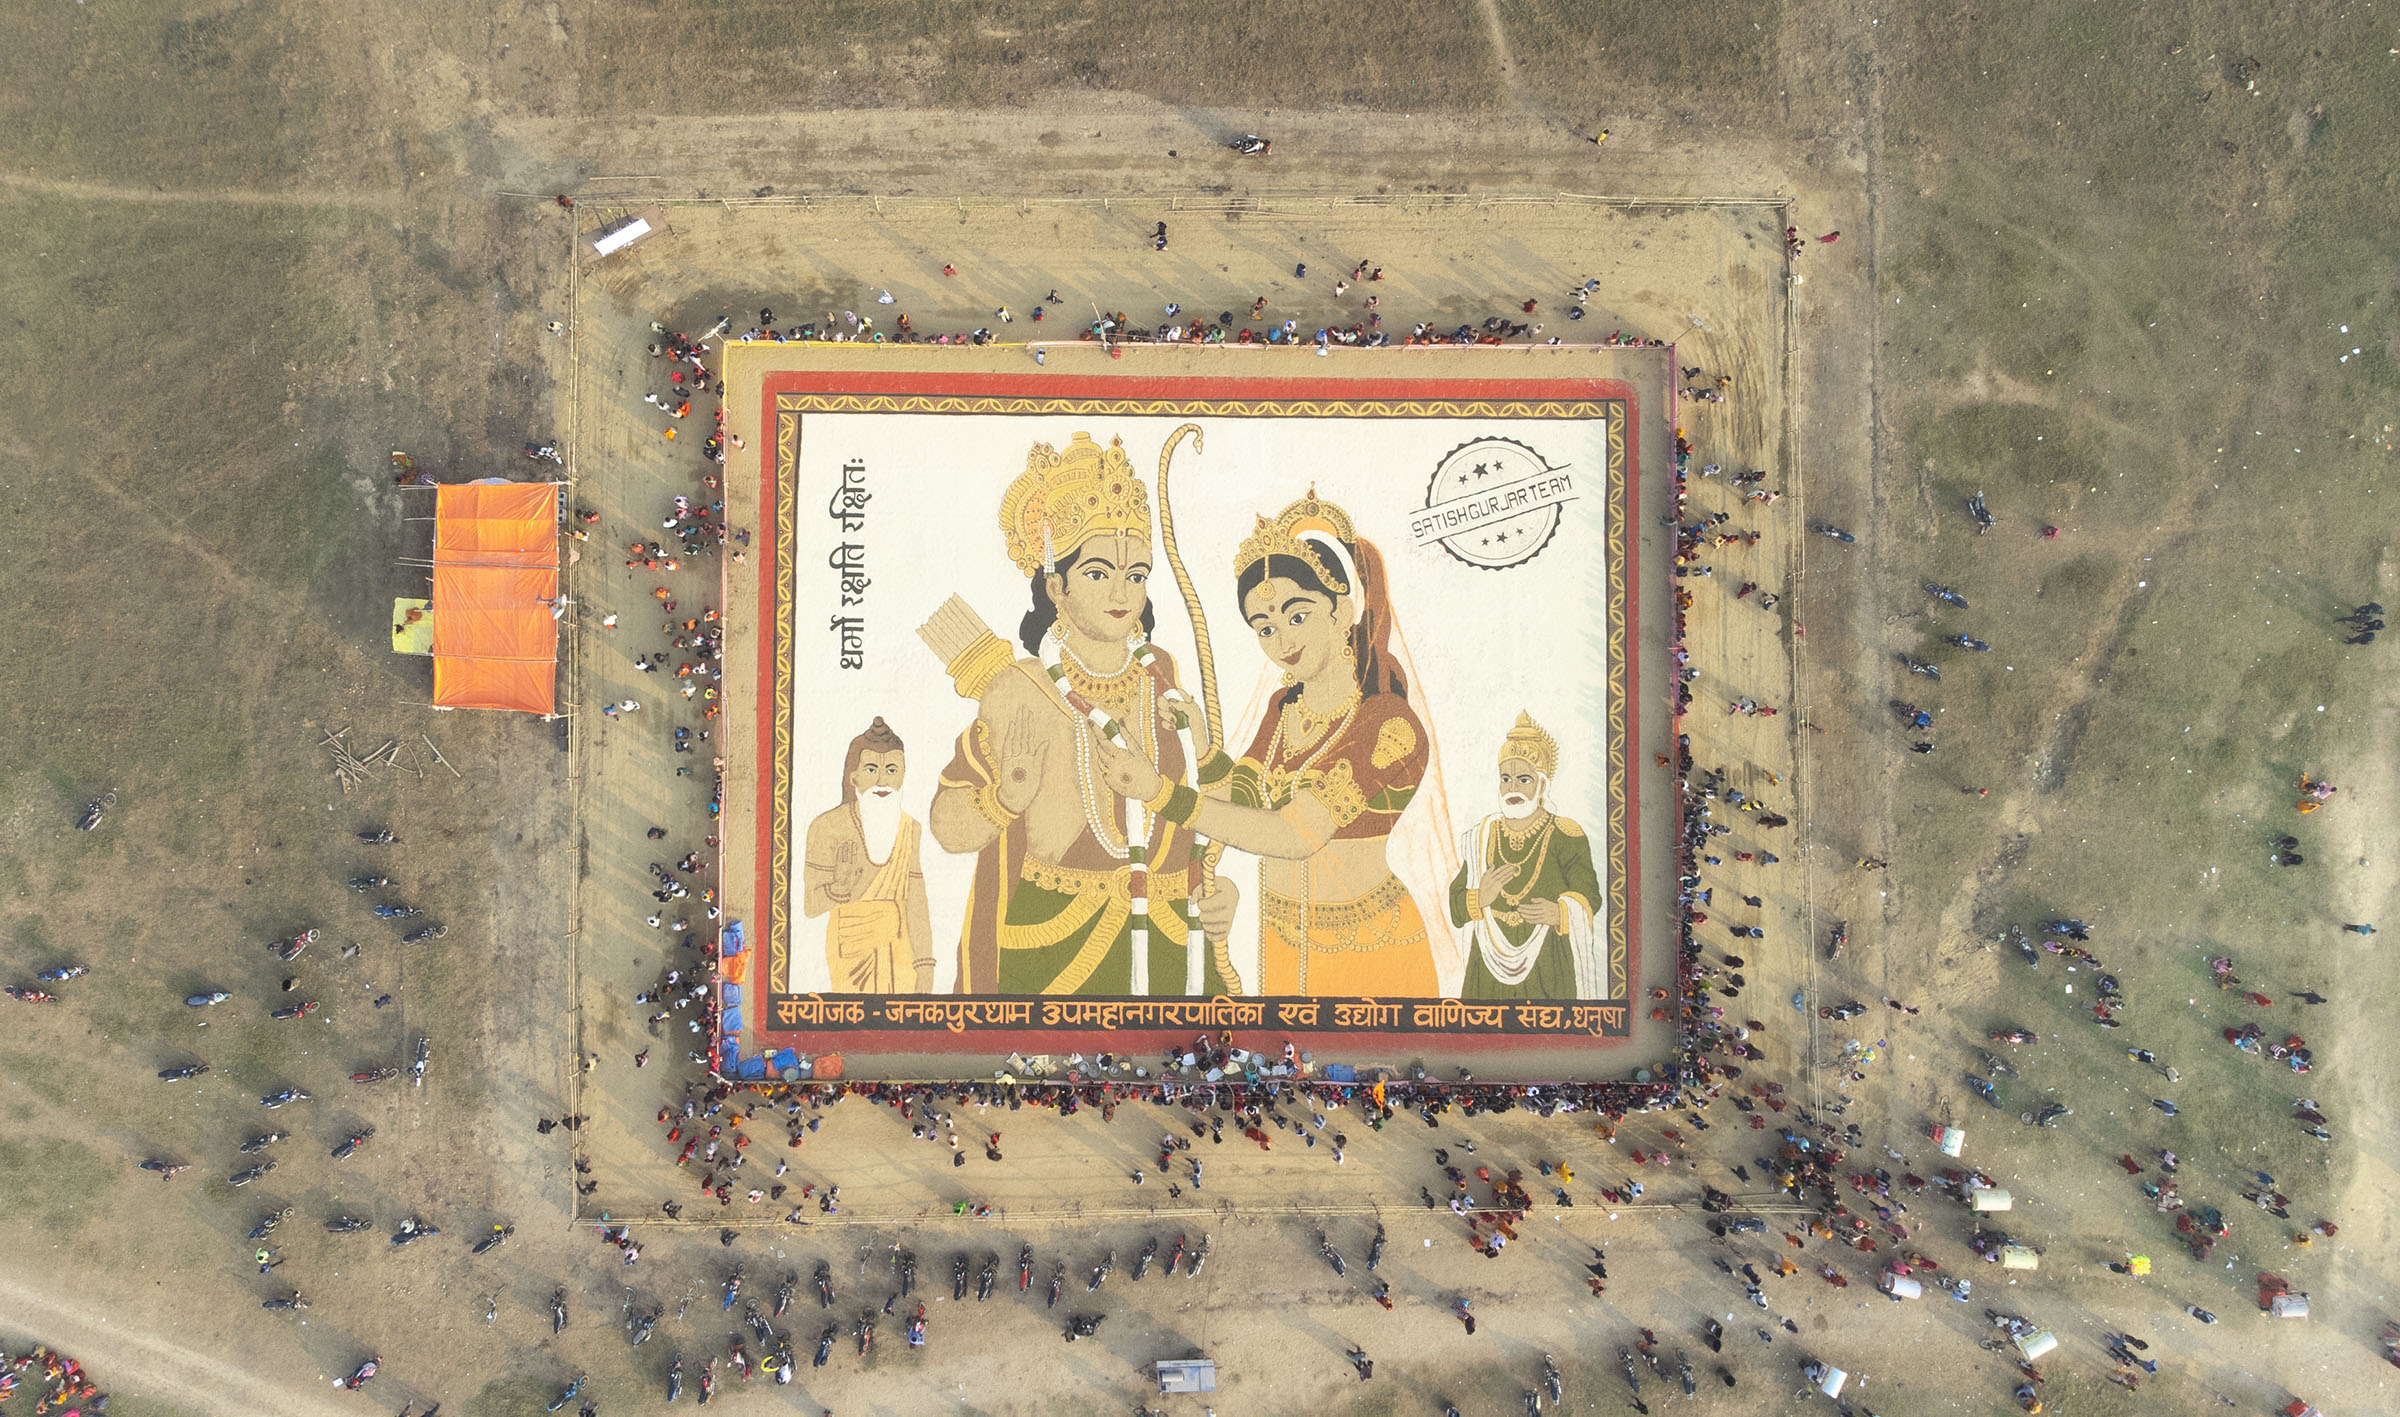 Sita-Ram colossus prepared with 102 quintals of cereal inspires awe in Janakpurdham